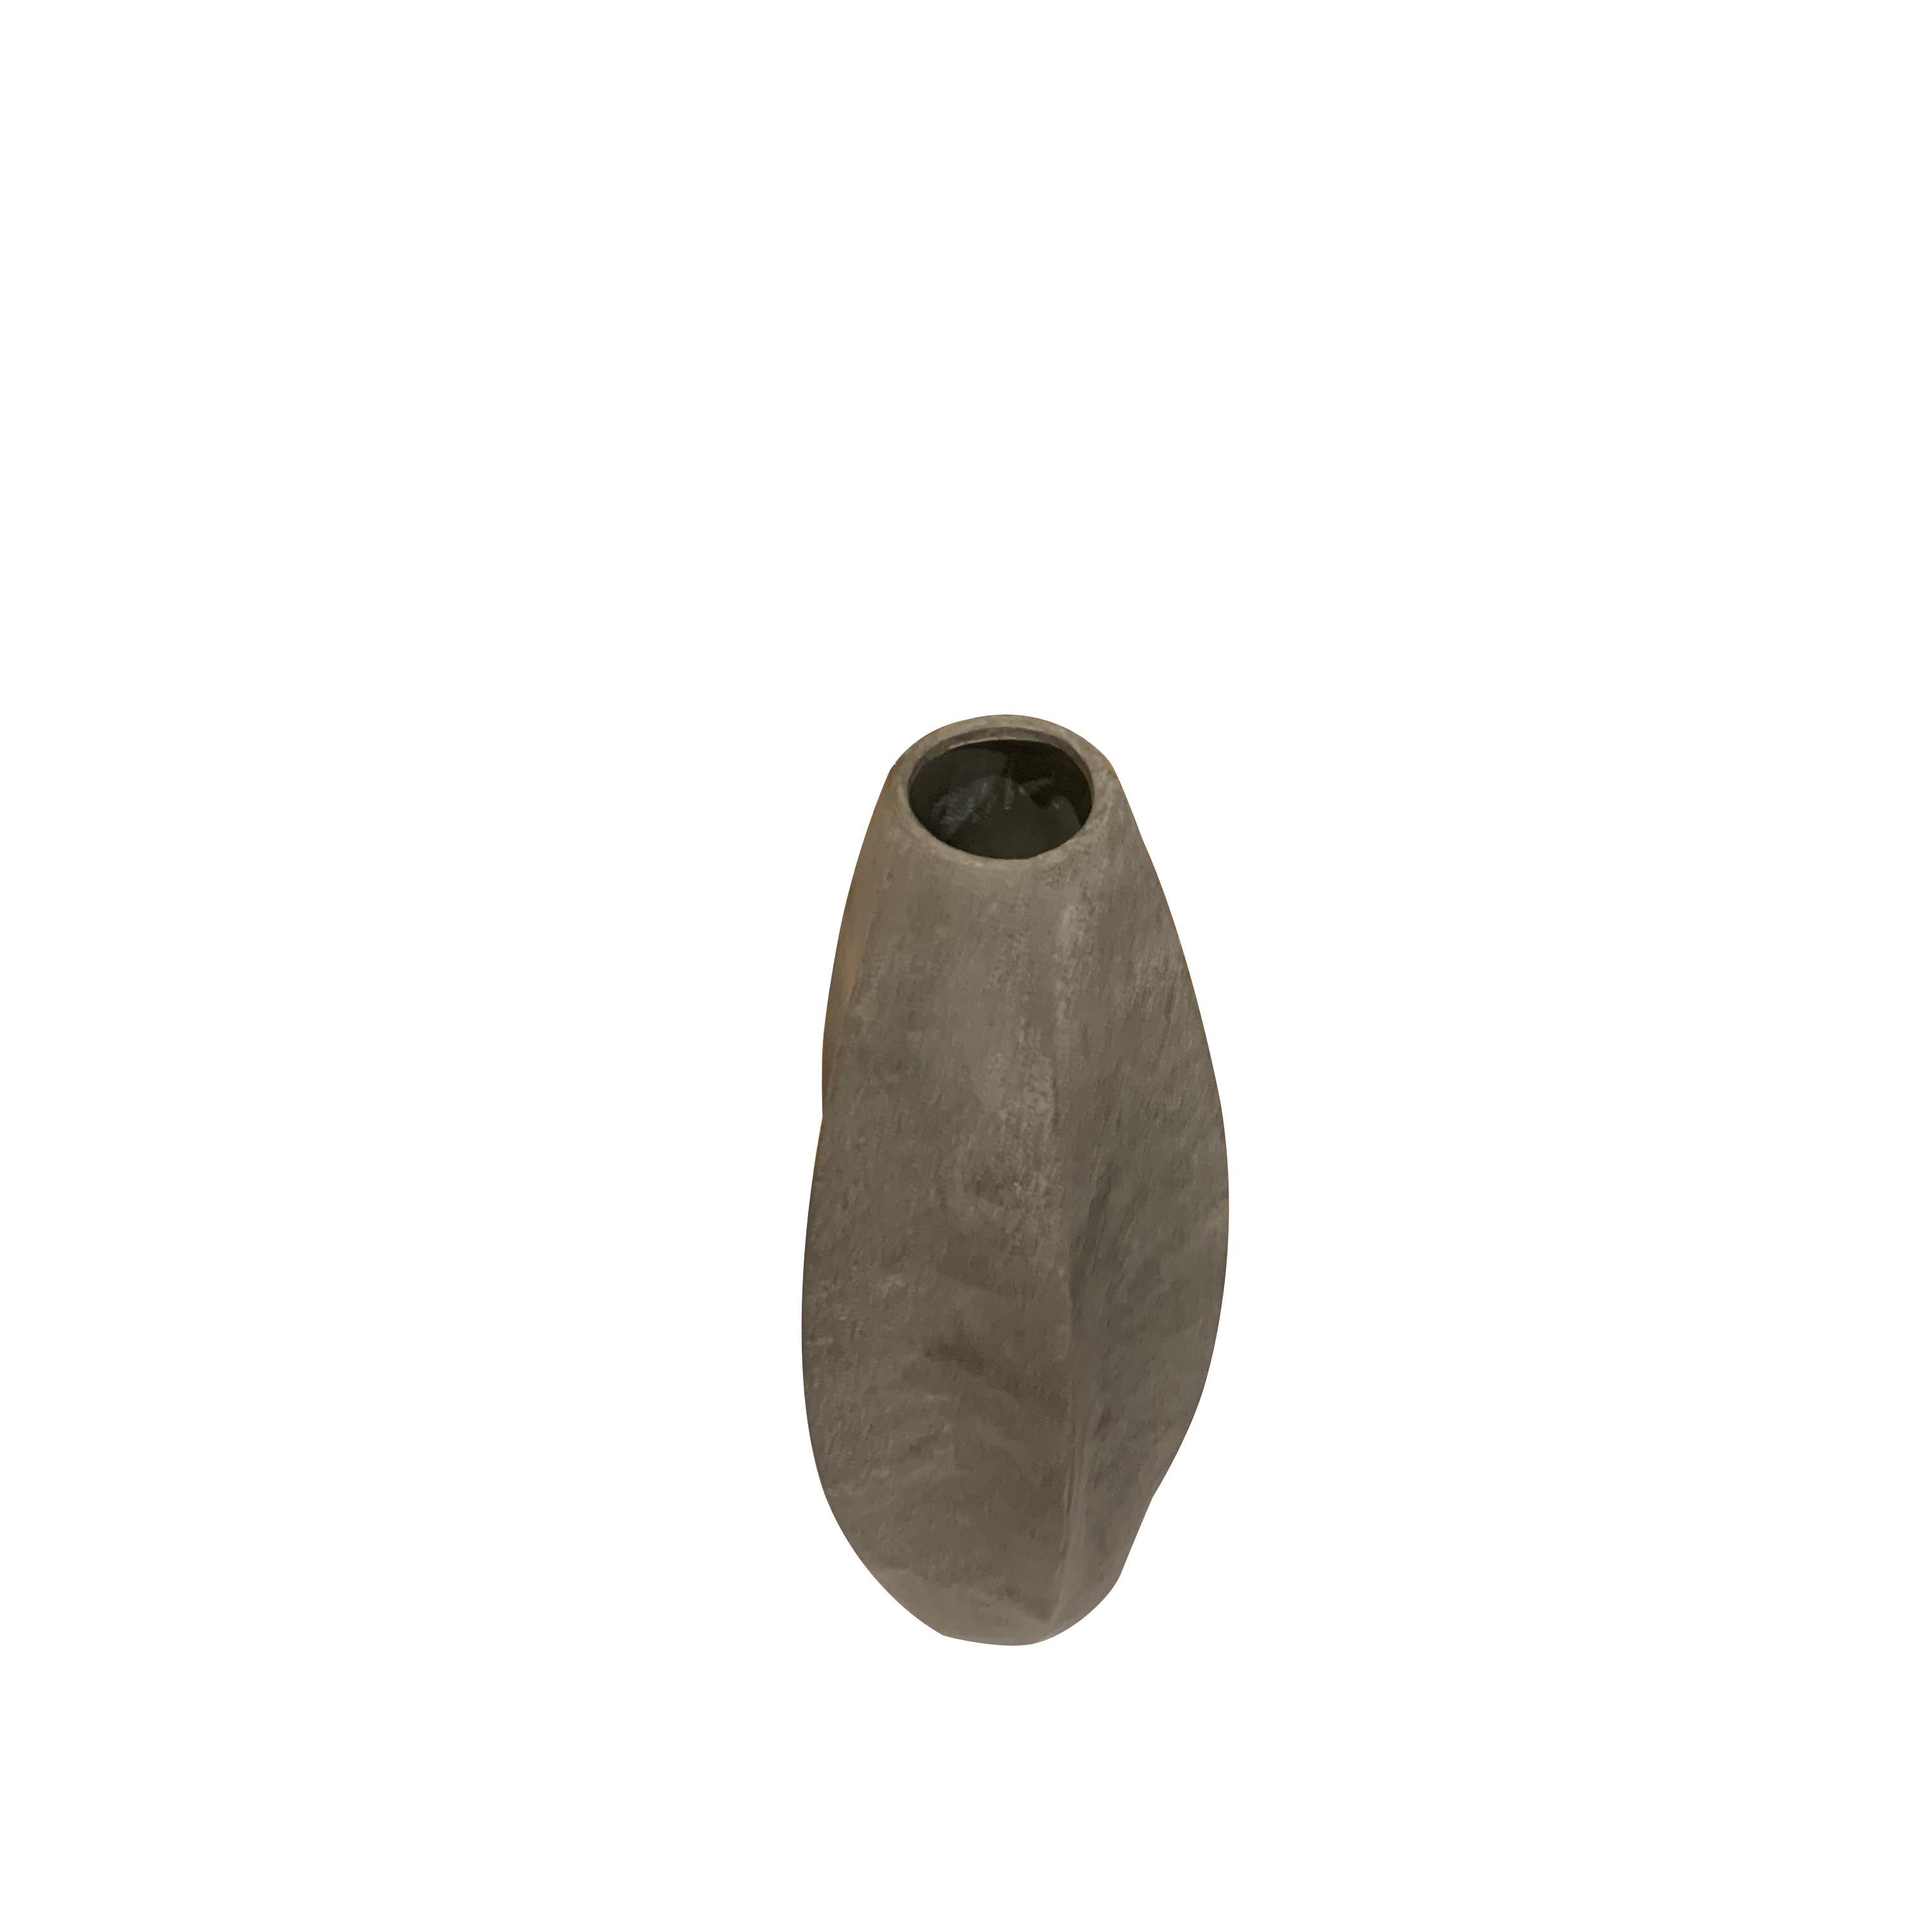 Contemporary Danish matte grey glaze ceramic vase.
Tall cylinder shape with inverted curves.
One of a collection of many shapes and sizes.
